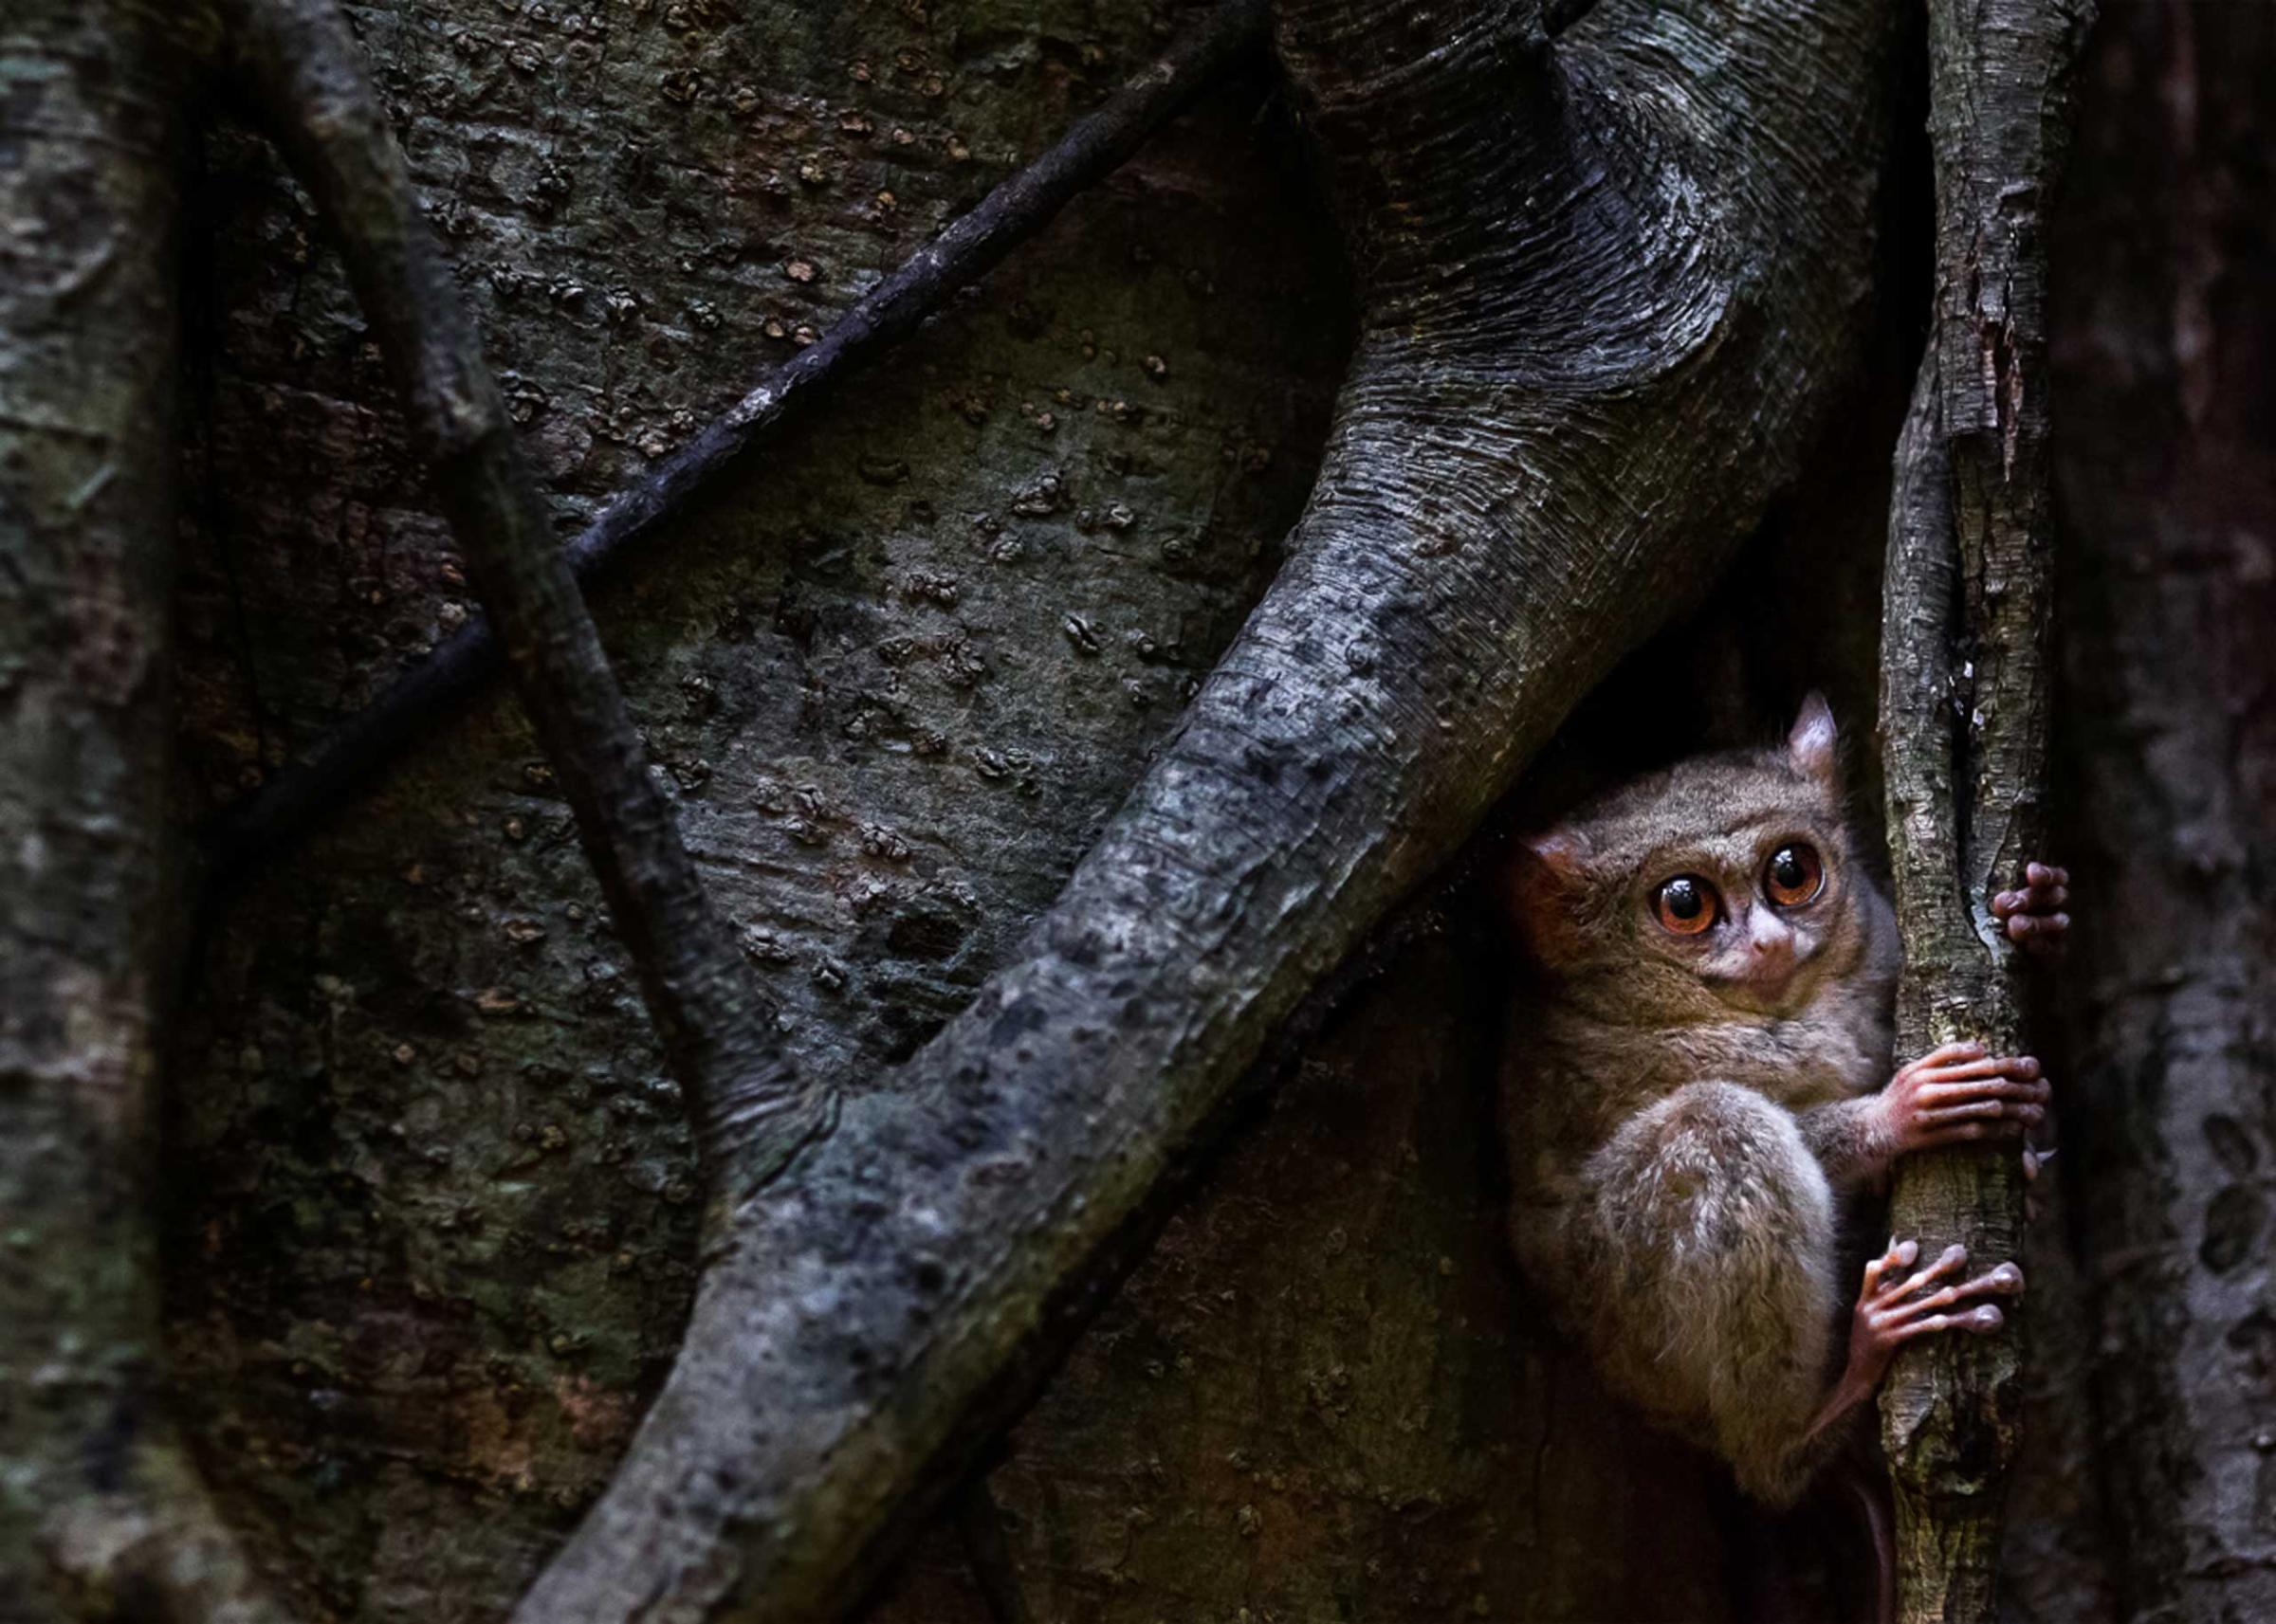 A tarsier in its natural habitat in Sulawesi, Indonesia.